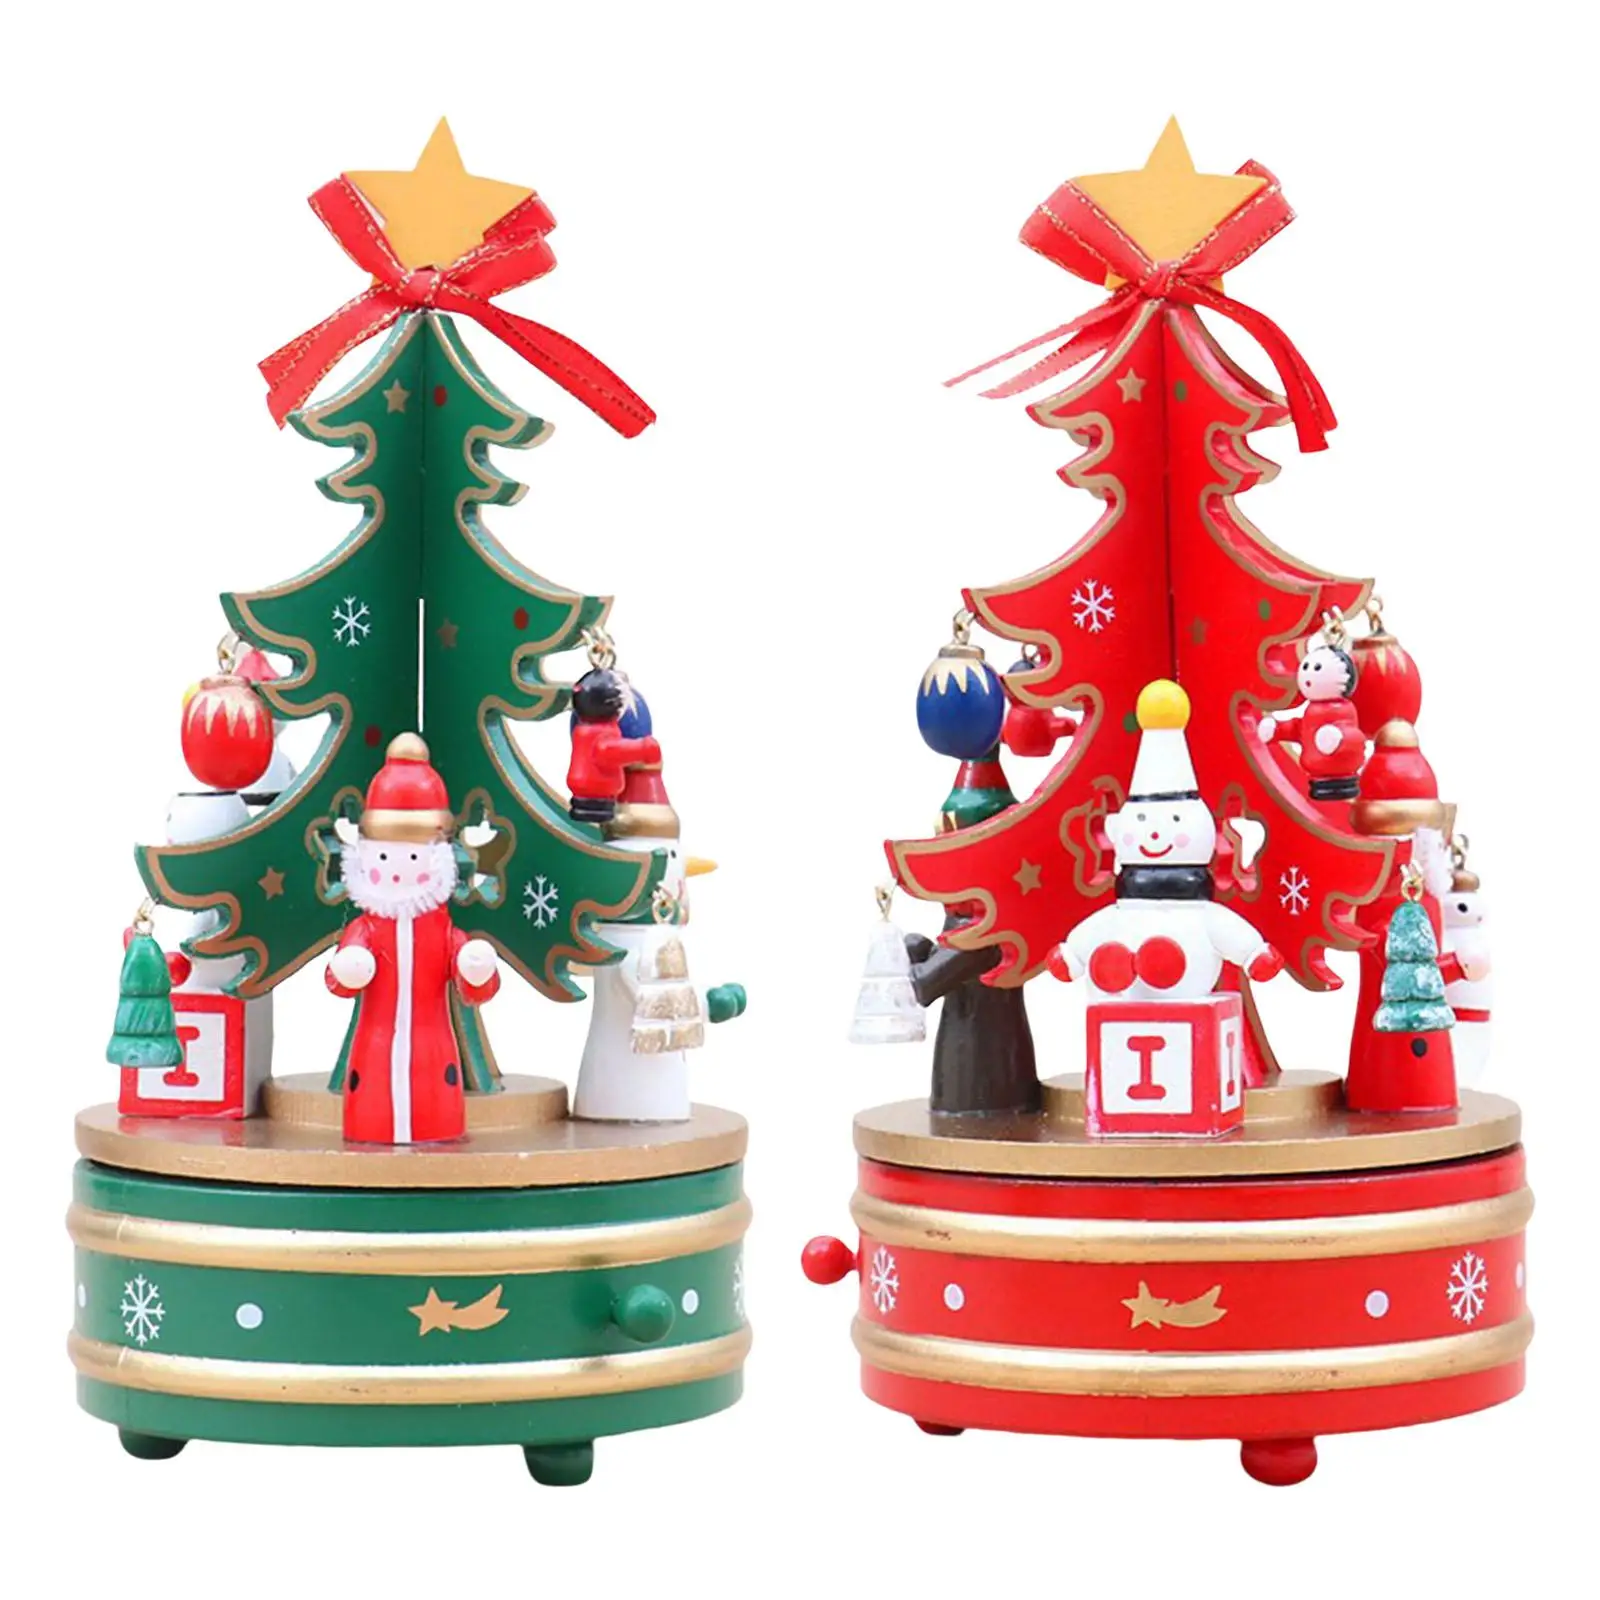 Portable Music Box Rotatable Wooden Musical Box Carousel Decoration Toy for Desktop Party Home Ornament Kids Gift